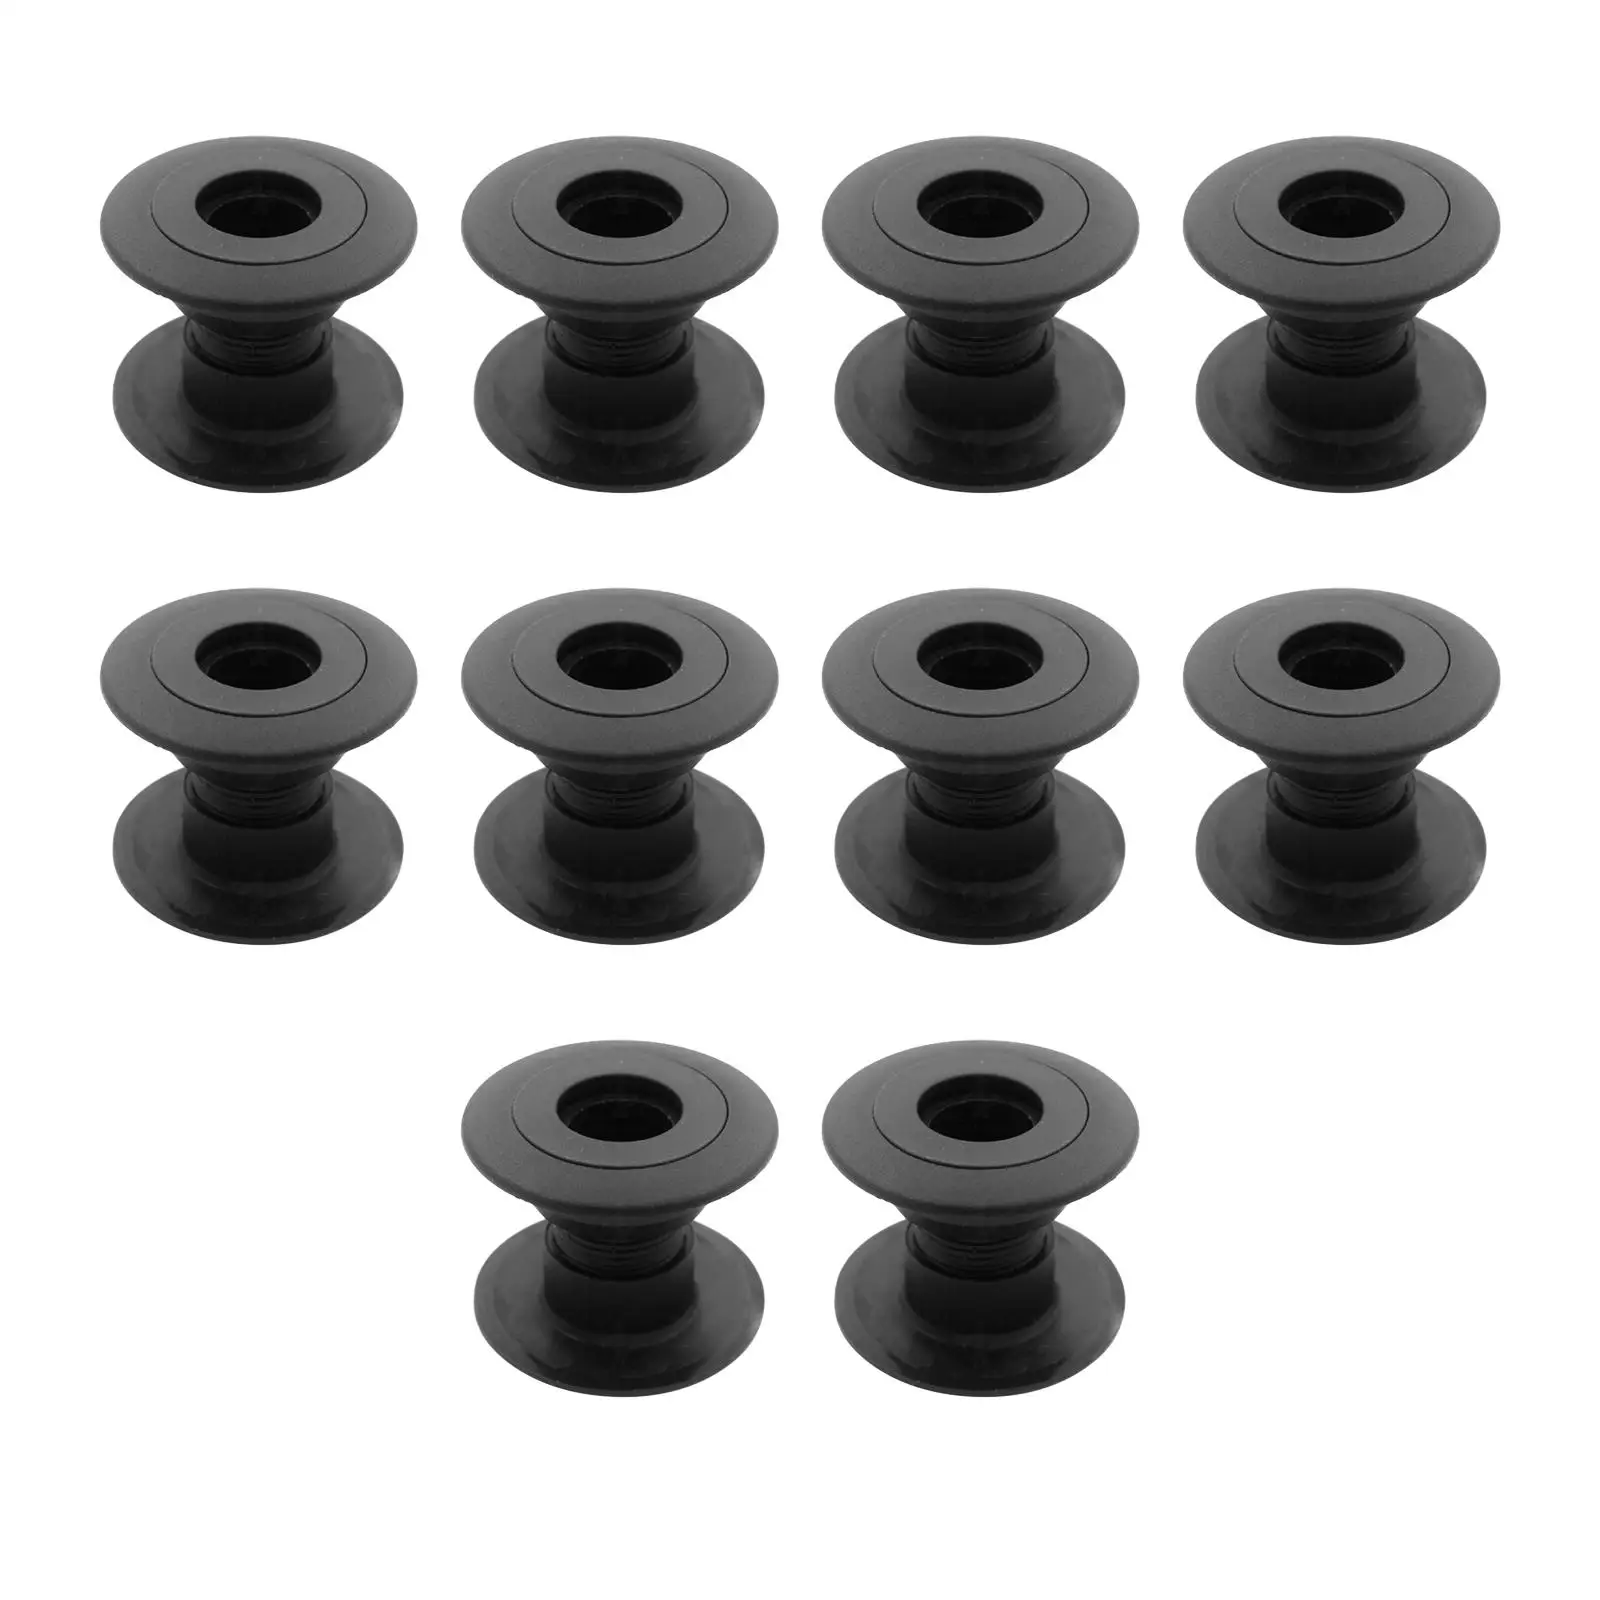 Foosball Bearing Rods Soccer Games Foosball Bushings Durable Threaded Structure for Standard Foosball Tables Replacement